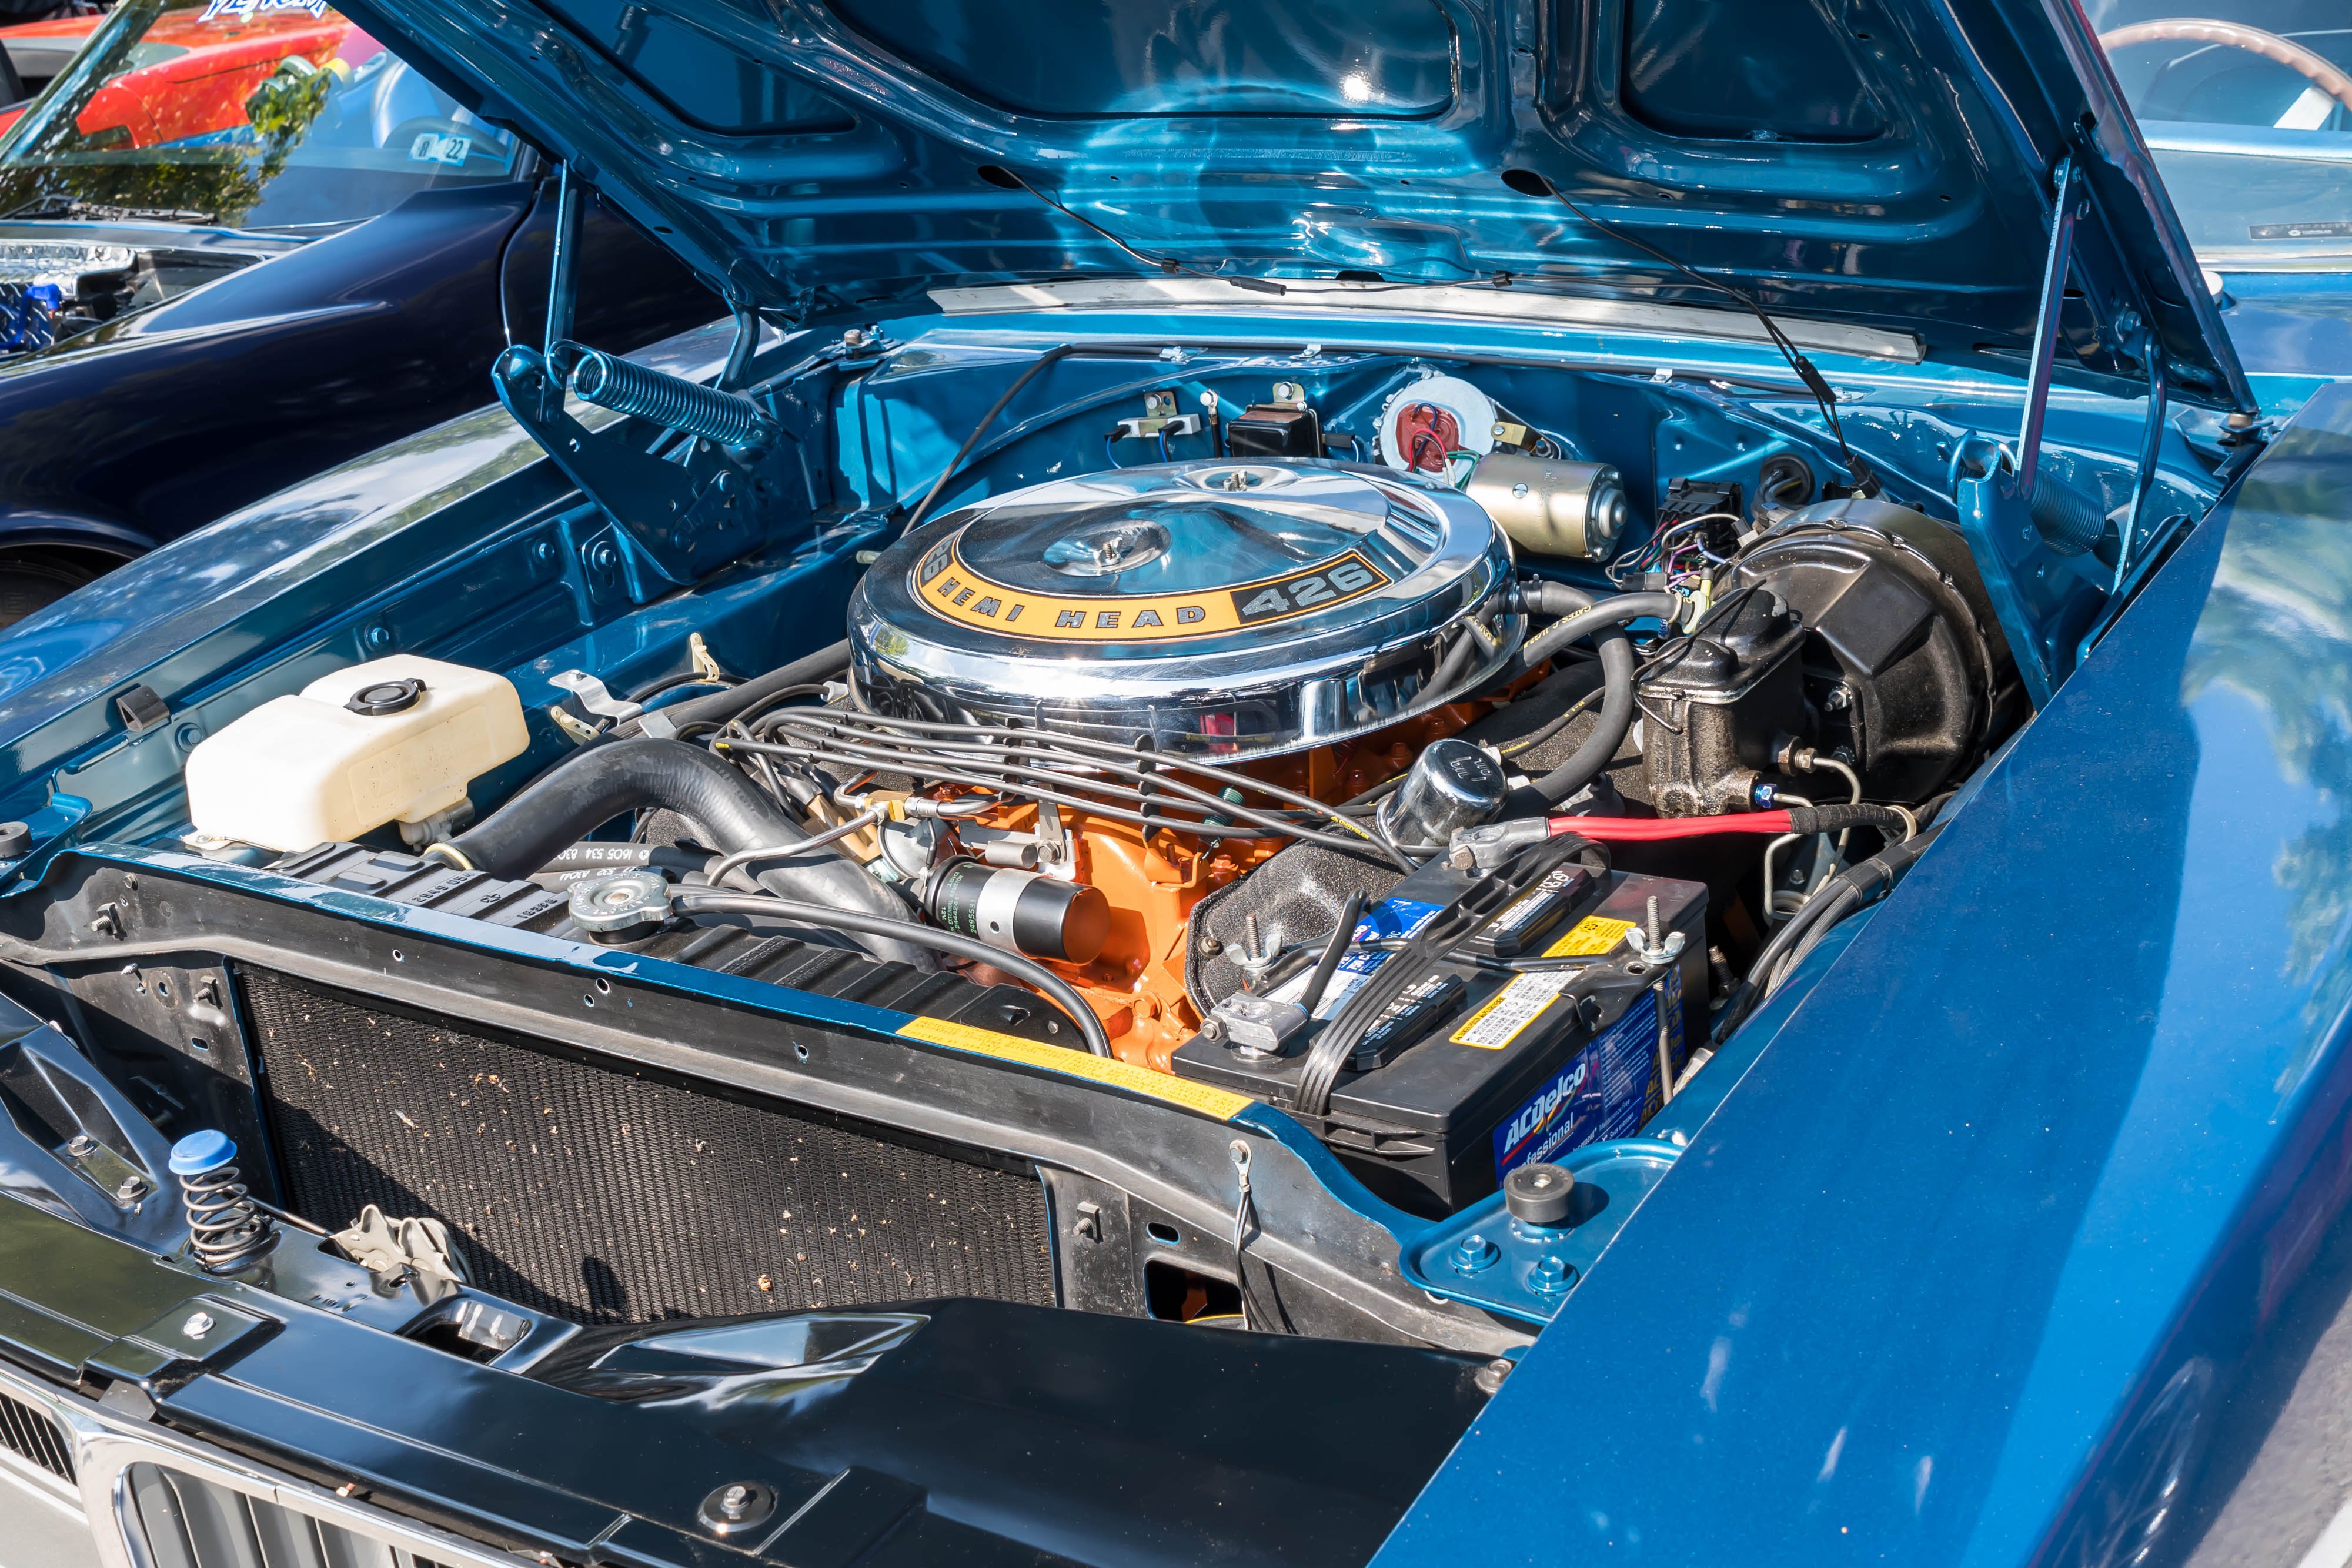 the engine compartment of a blue Dodge Charger from the 1970s